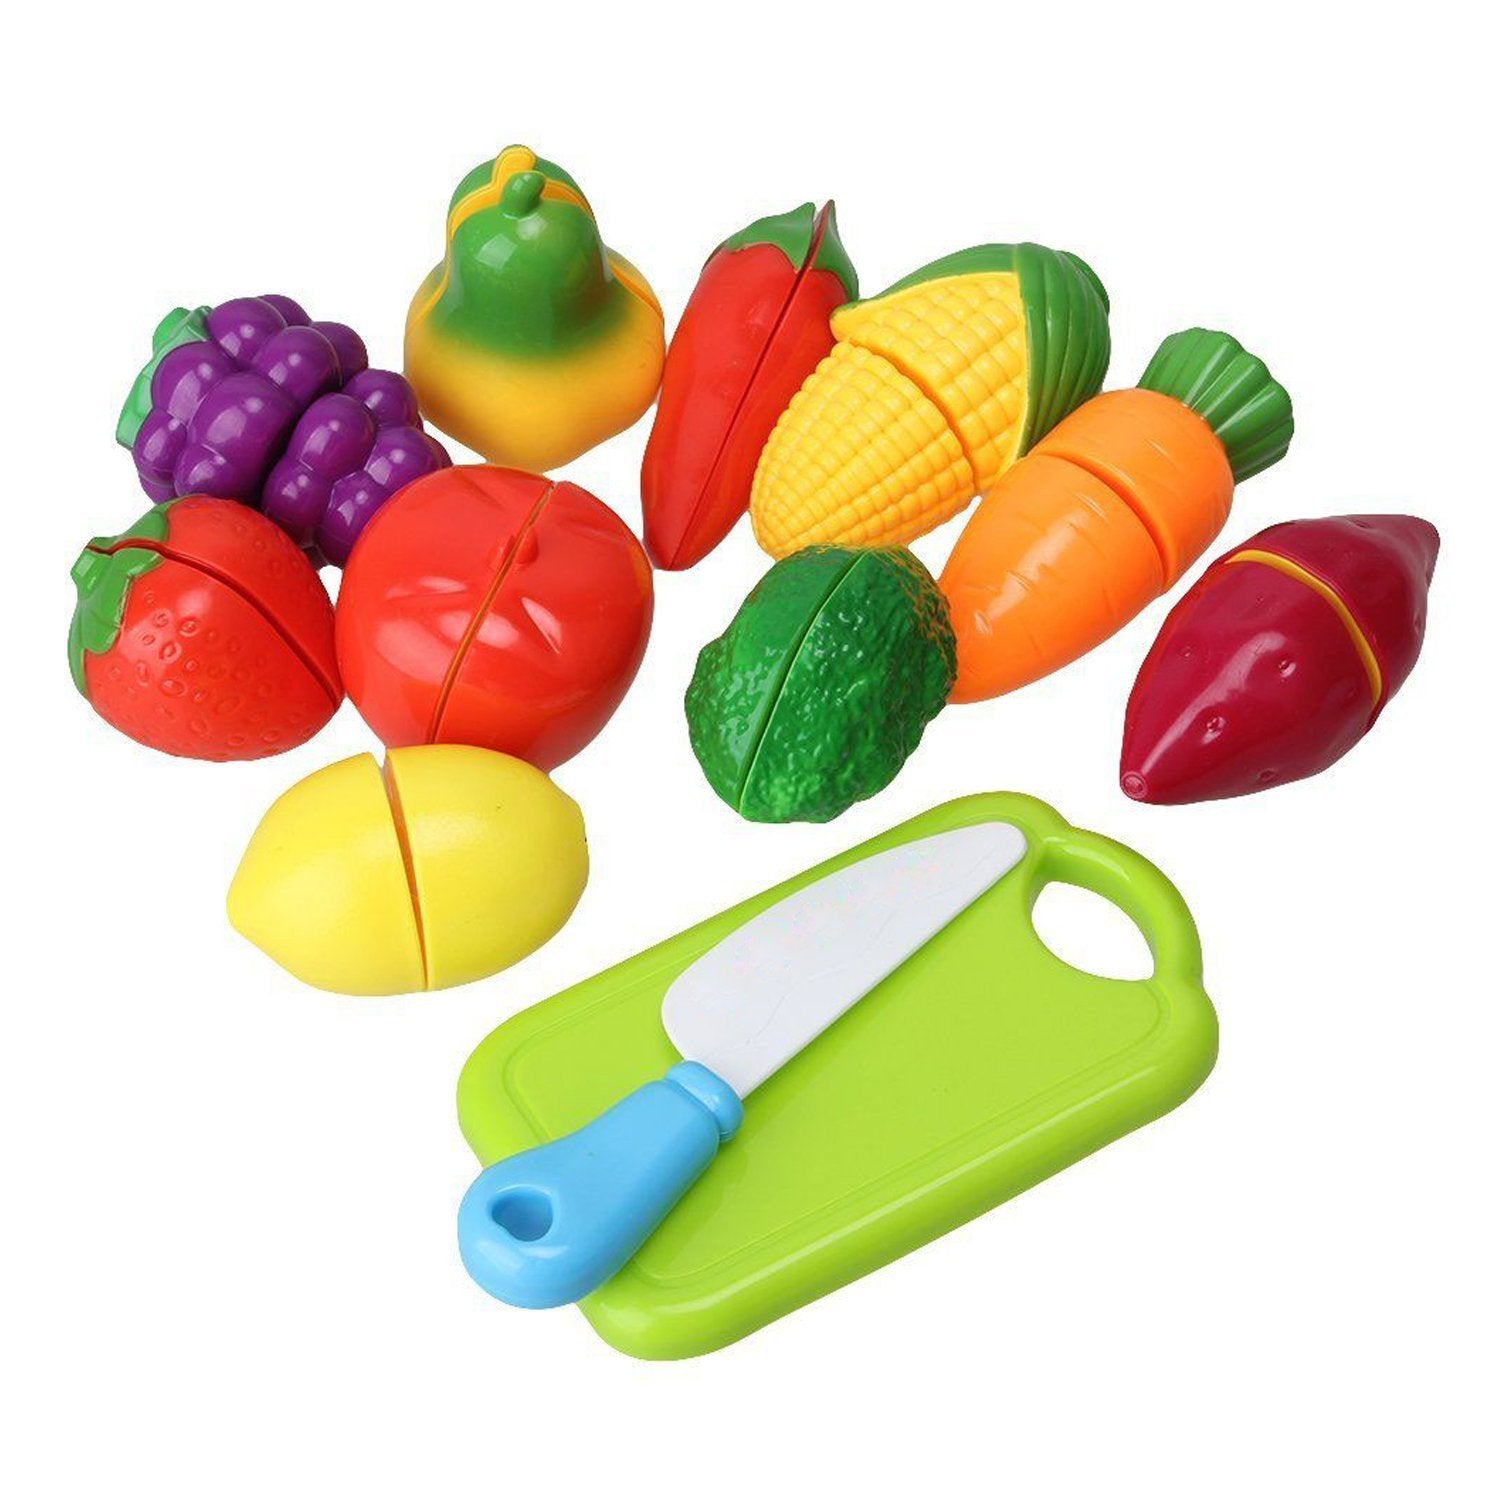 8037 Plastic Fruits N Veggies Exclusive Collection of Realistic Sliceable Fruits DeoDap